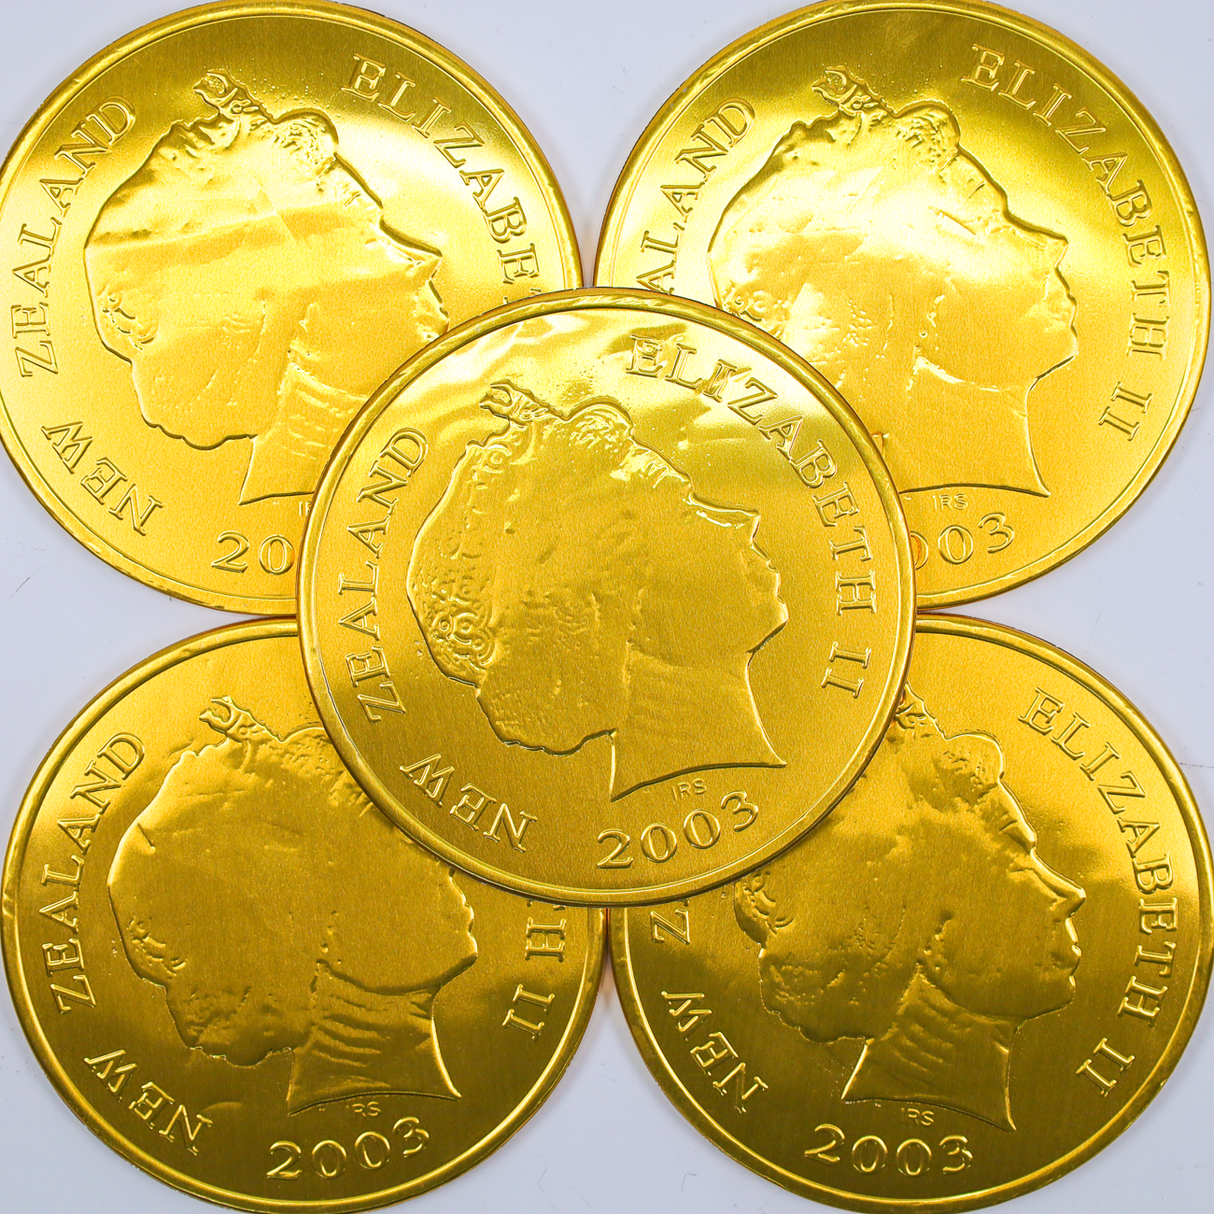 Giant Gold Coin 80g